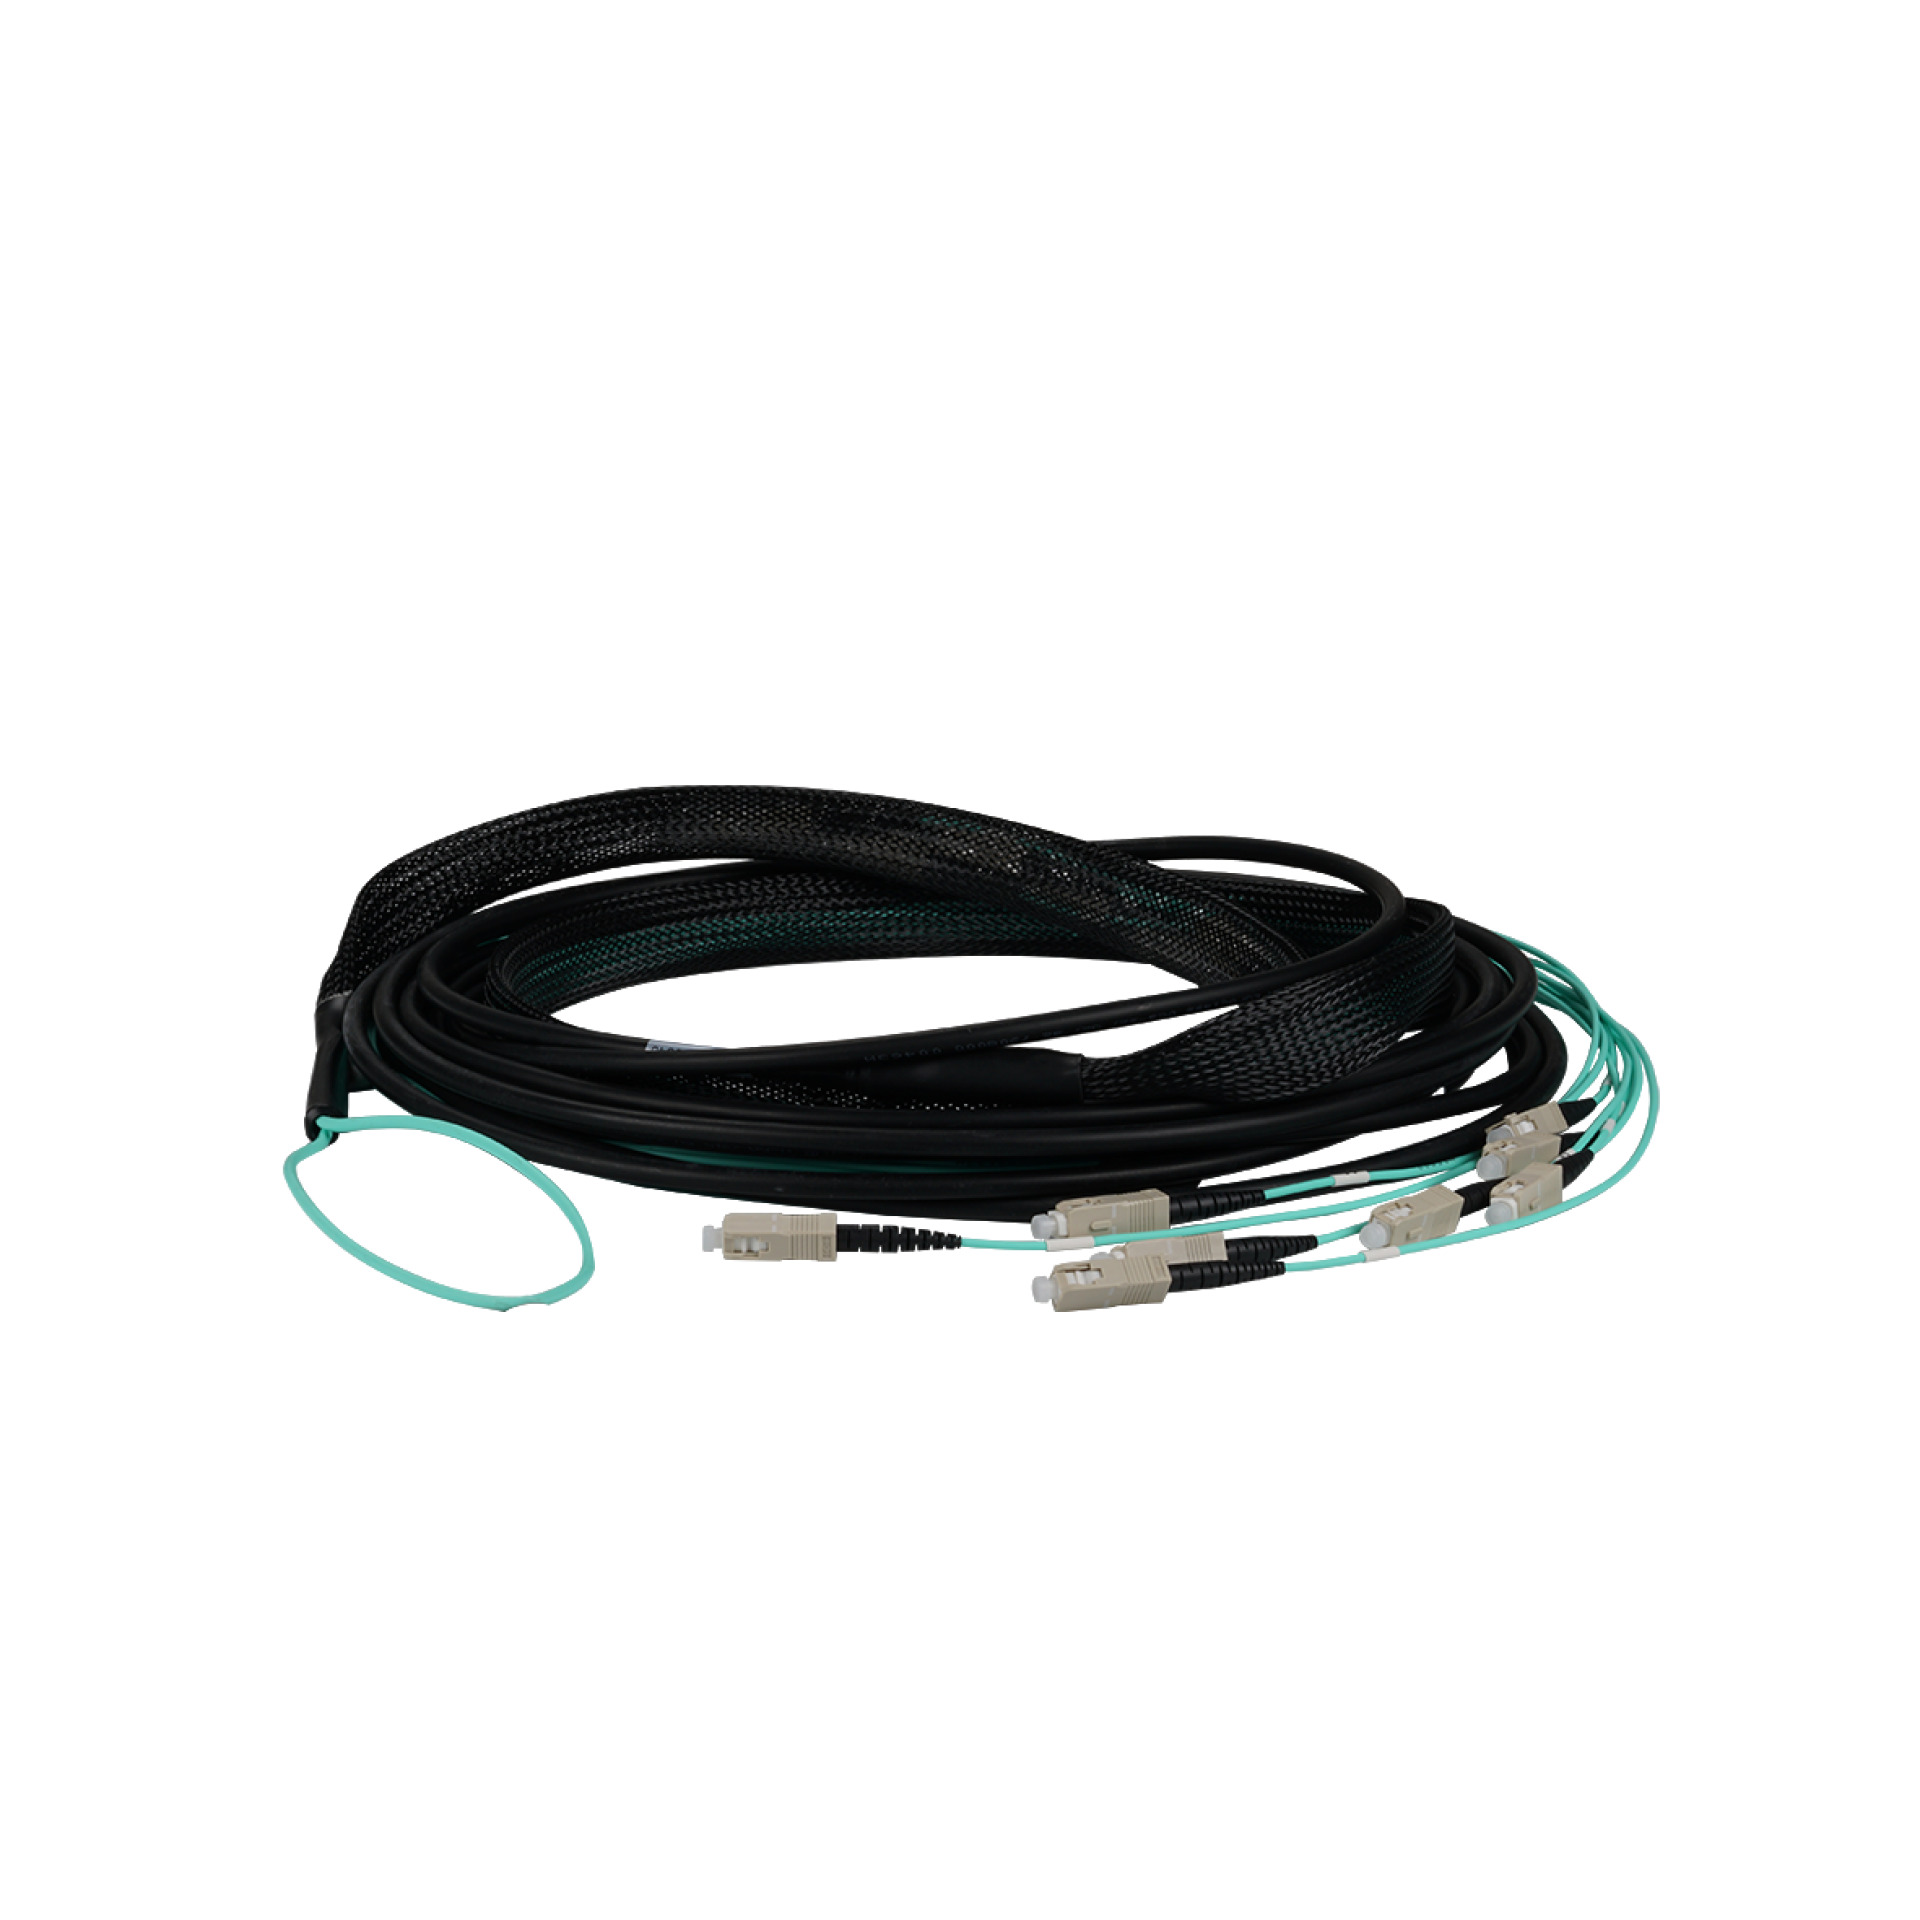 Trunk cable U-DQ(ZN)BH 4G 50/125, SC/SC OM3 70m